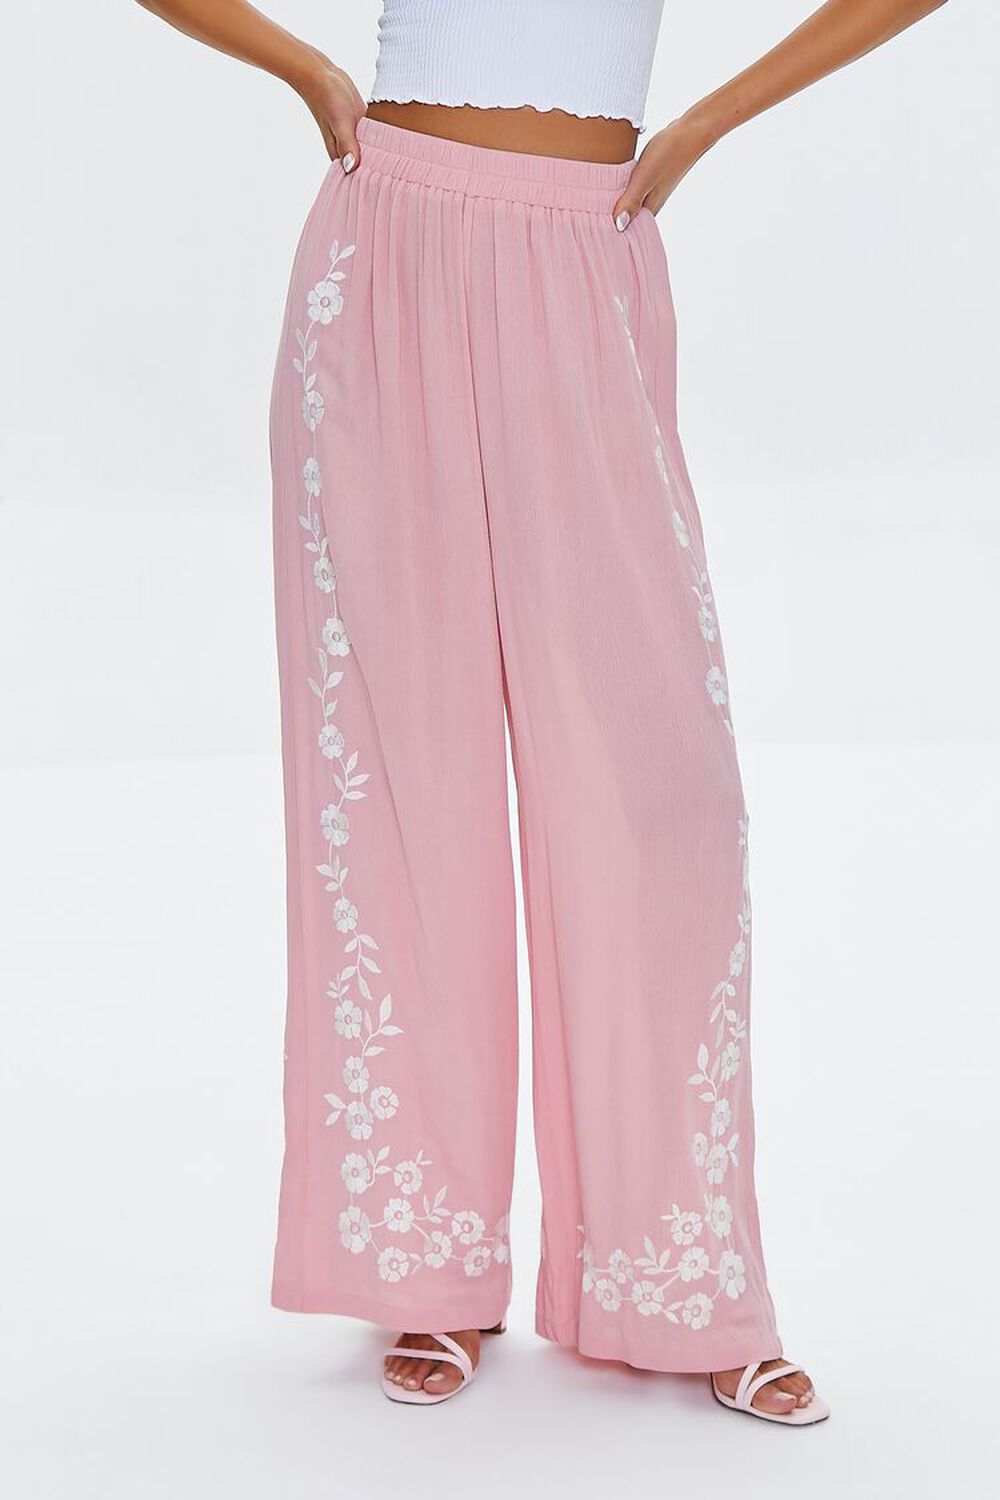 ROSE/CREAM Floral Embroidered Palazzo Pants, image 2